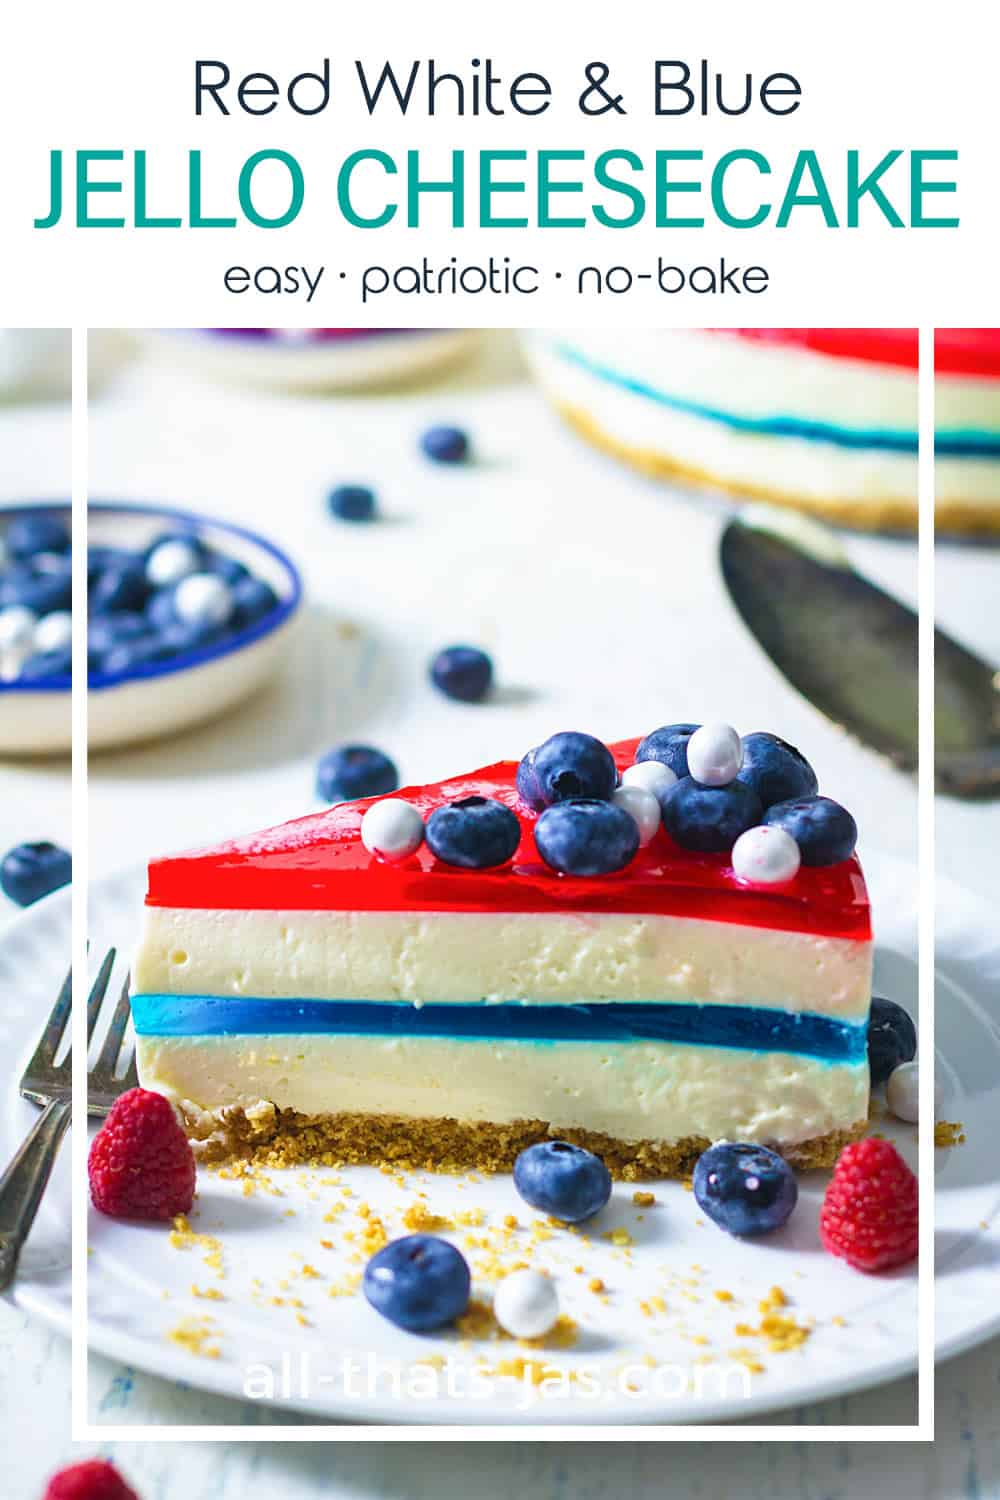 A close up of the cheesecake showing the blue middle jello layer and the red top jello layer with blueberries on top with text overlay.